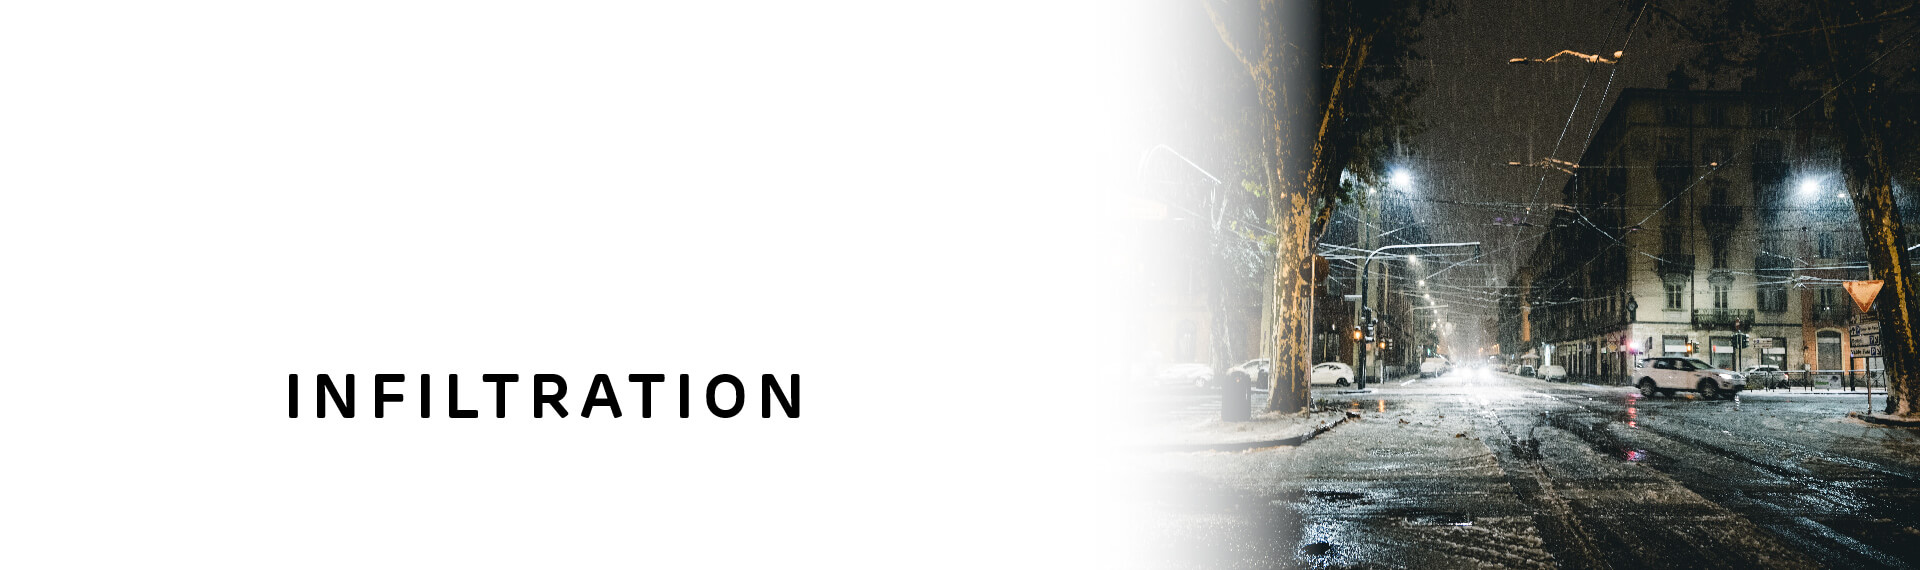 Header image with “Infiltration” in capital letters; with a photo of a dark, rainy street during a storm.